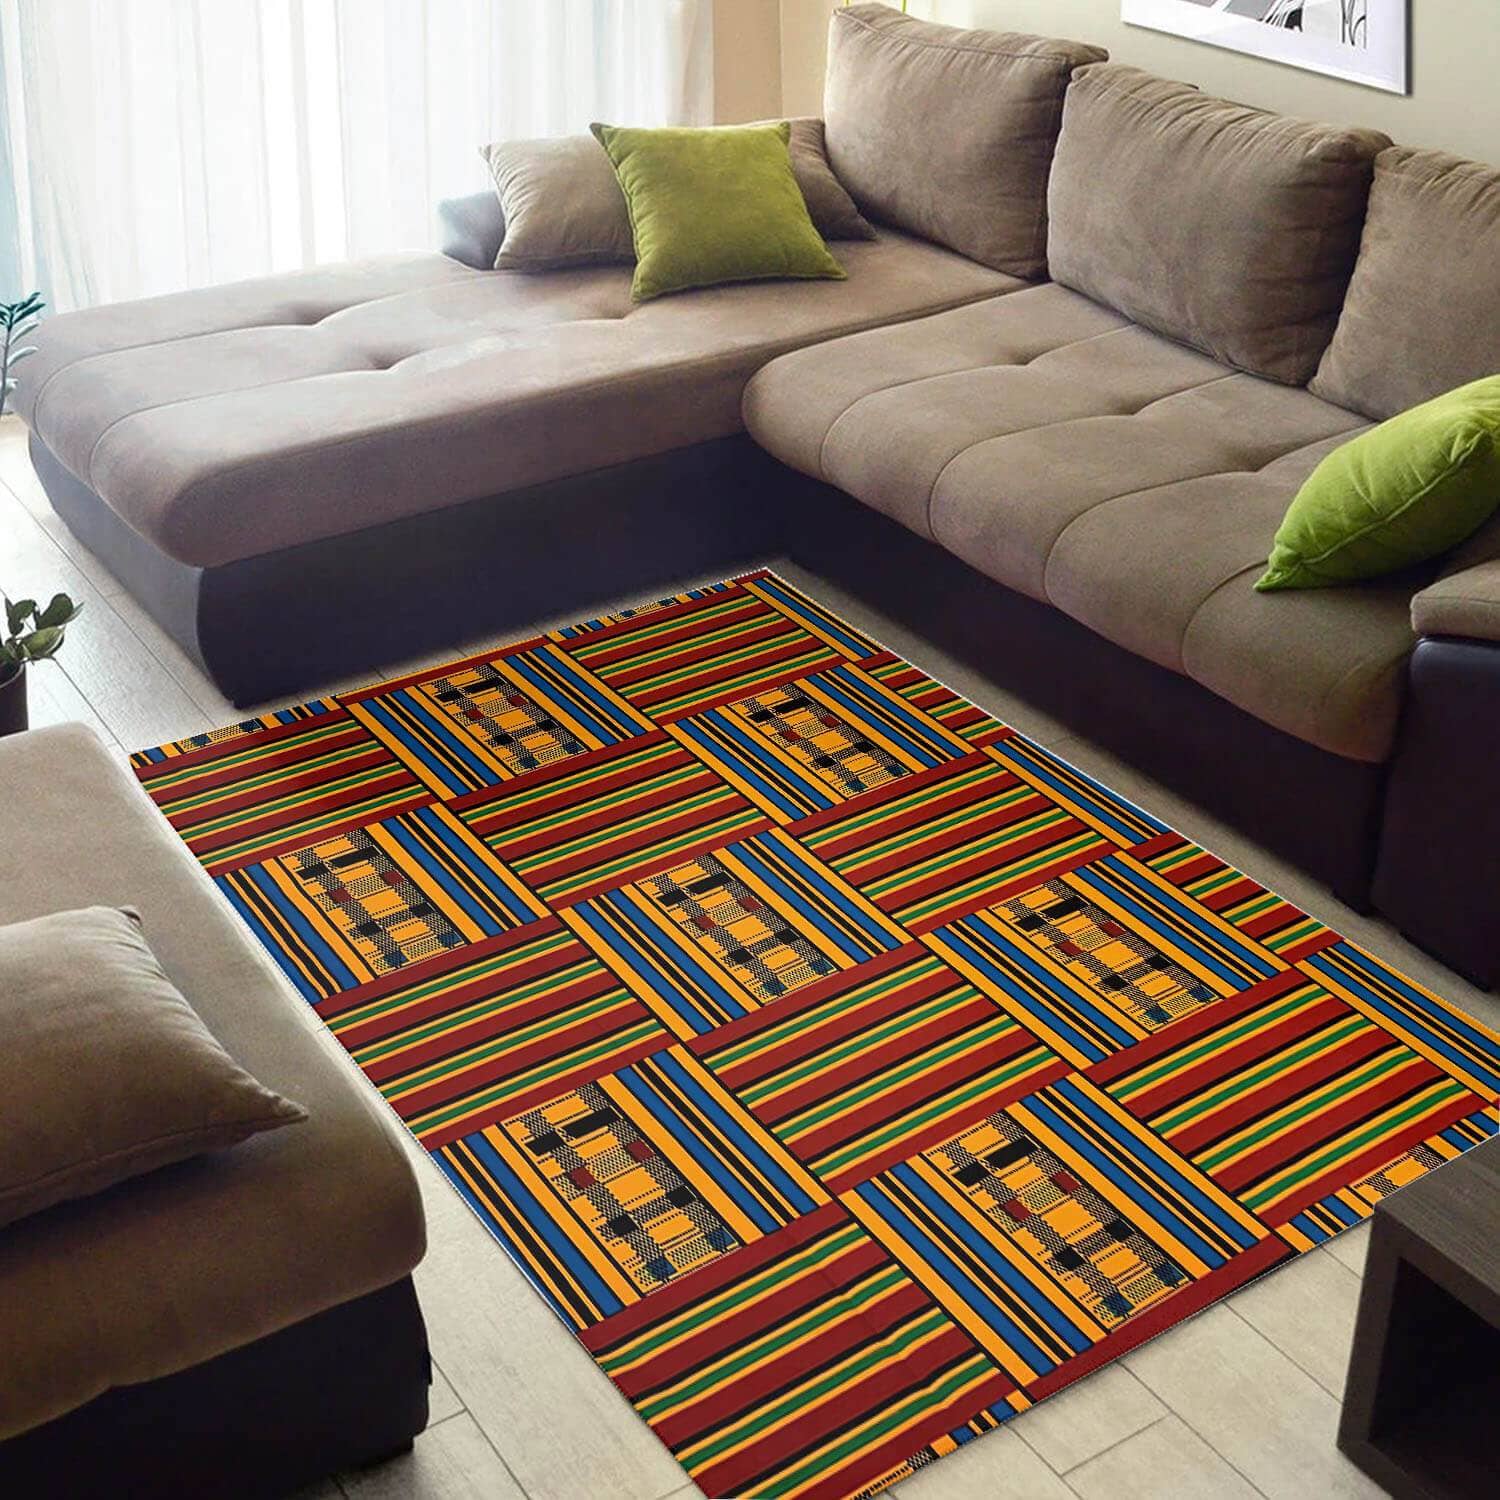 Cool African Nice Inspired Afrocentric Pattern Art Carpet Room Rug